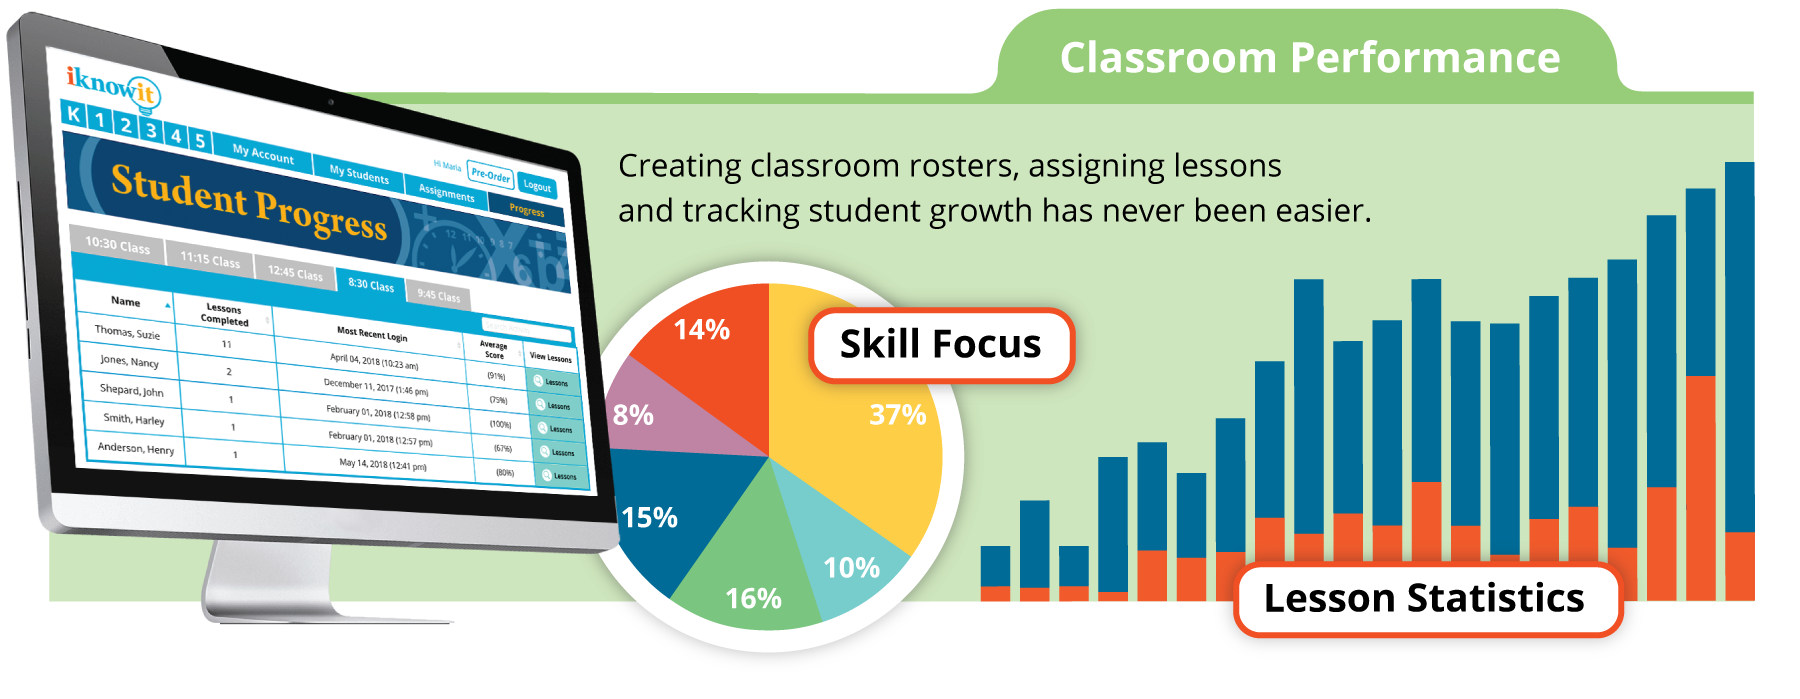 Creating classroom rosters, assigning lessons and tracking student growth has neve been easier.